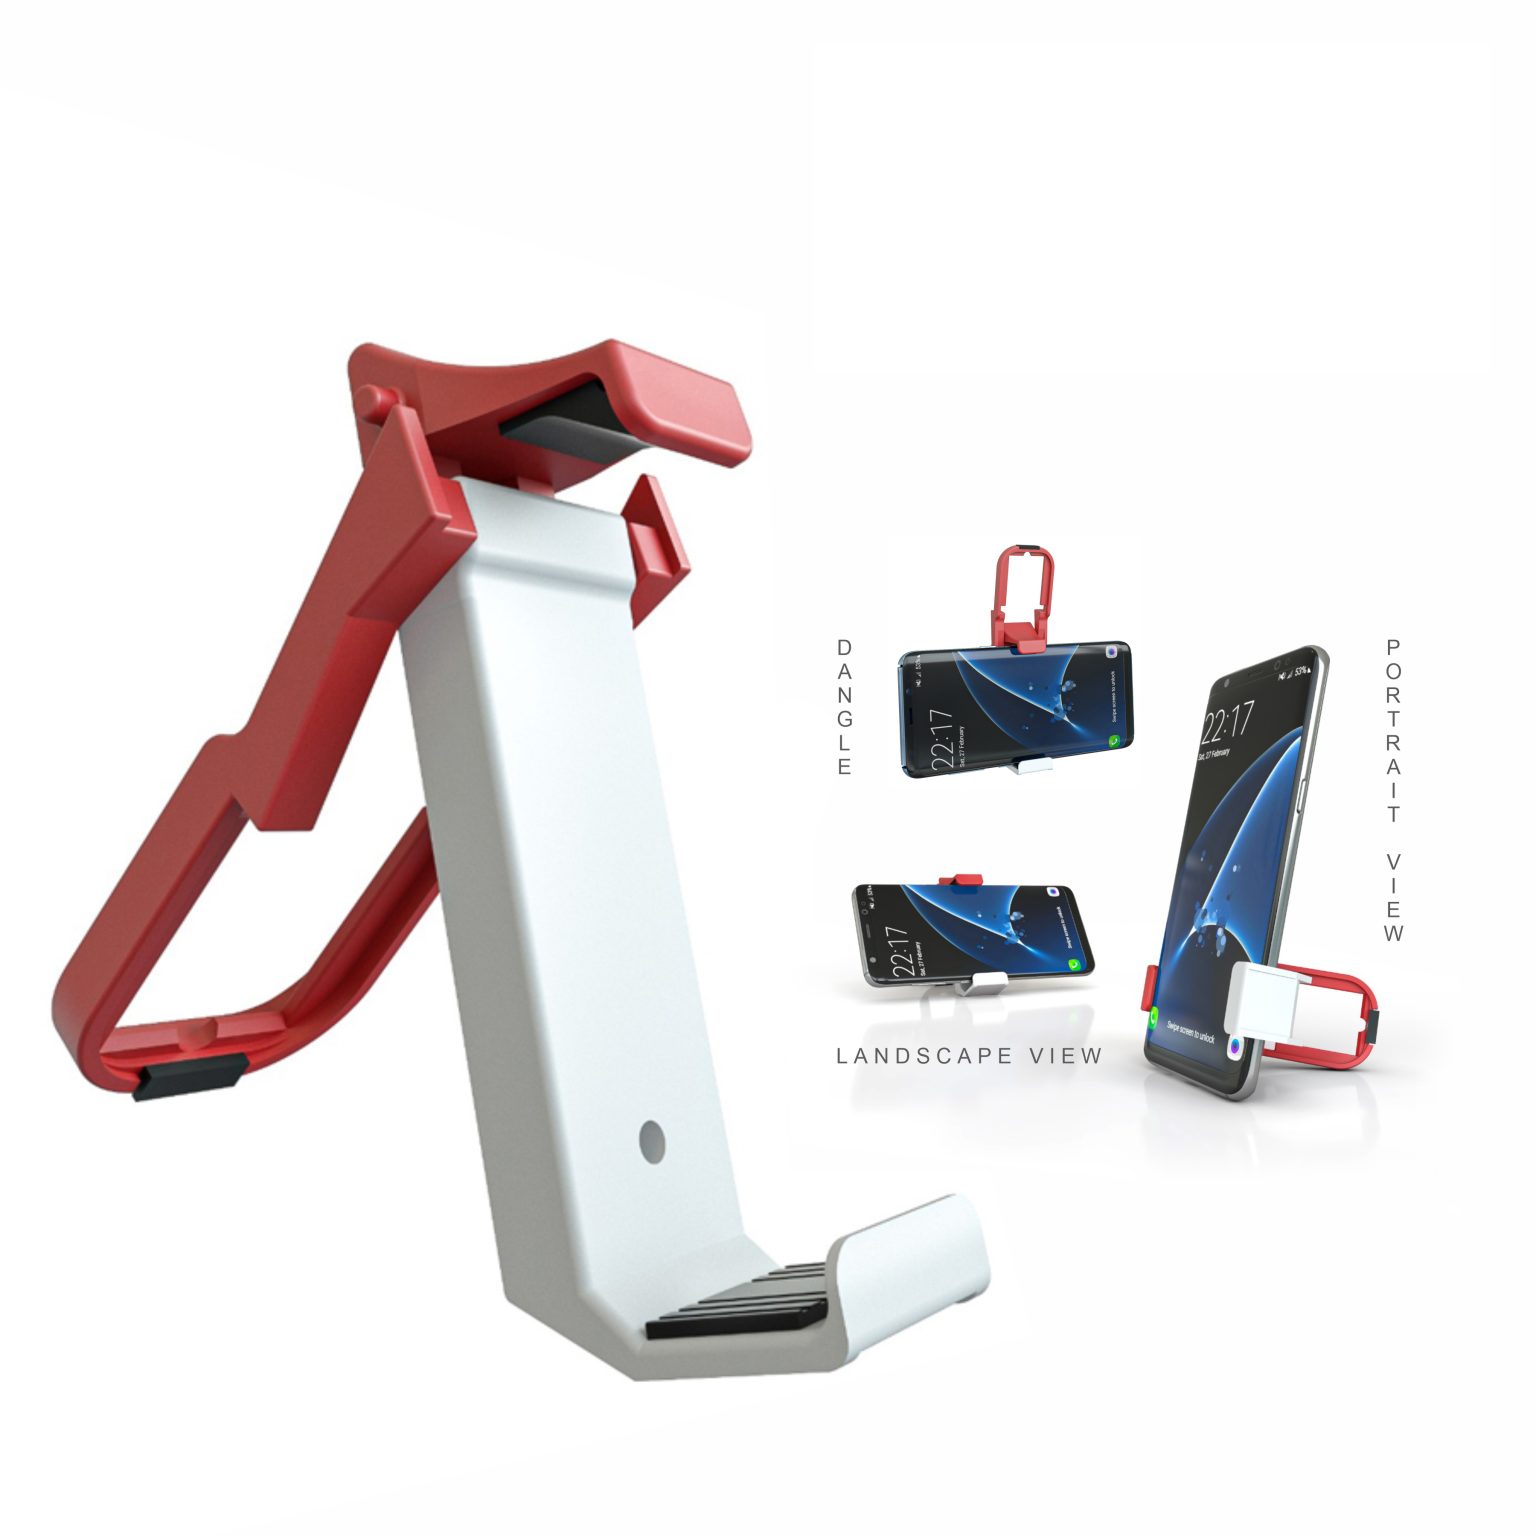 EasyMo Mobile Holder cum Dangler (2 in 1) – Hands Free Mobile Stand for Vertical and Horizontal viewing – Made In India